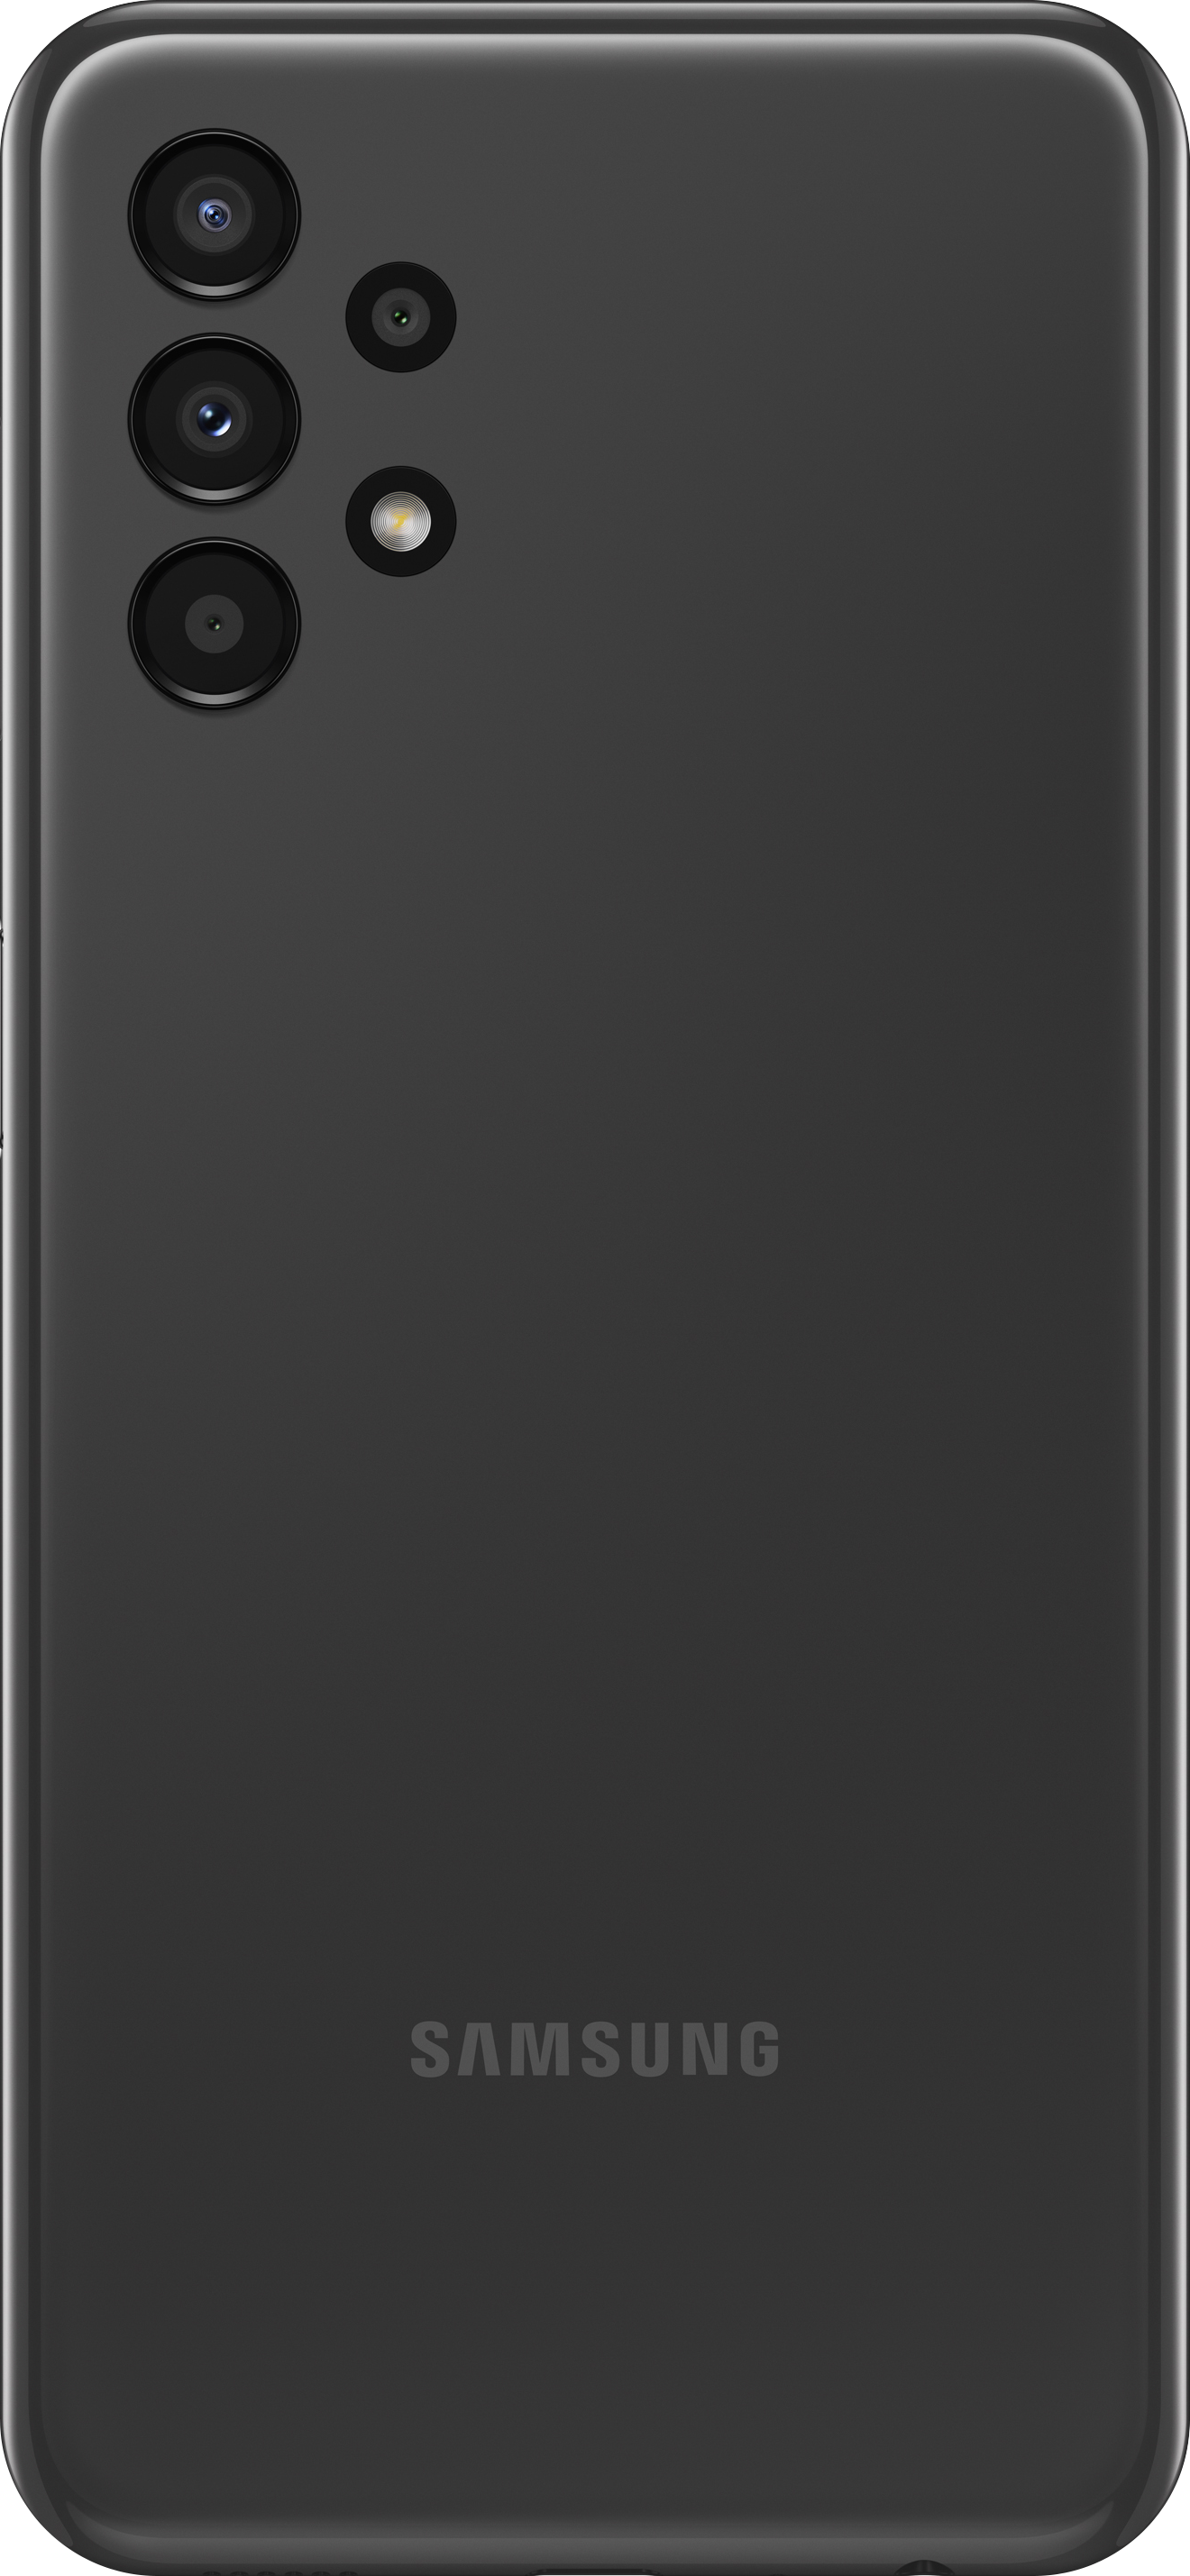 Rear view of A13 phone